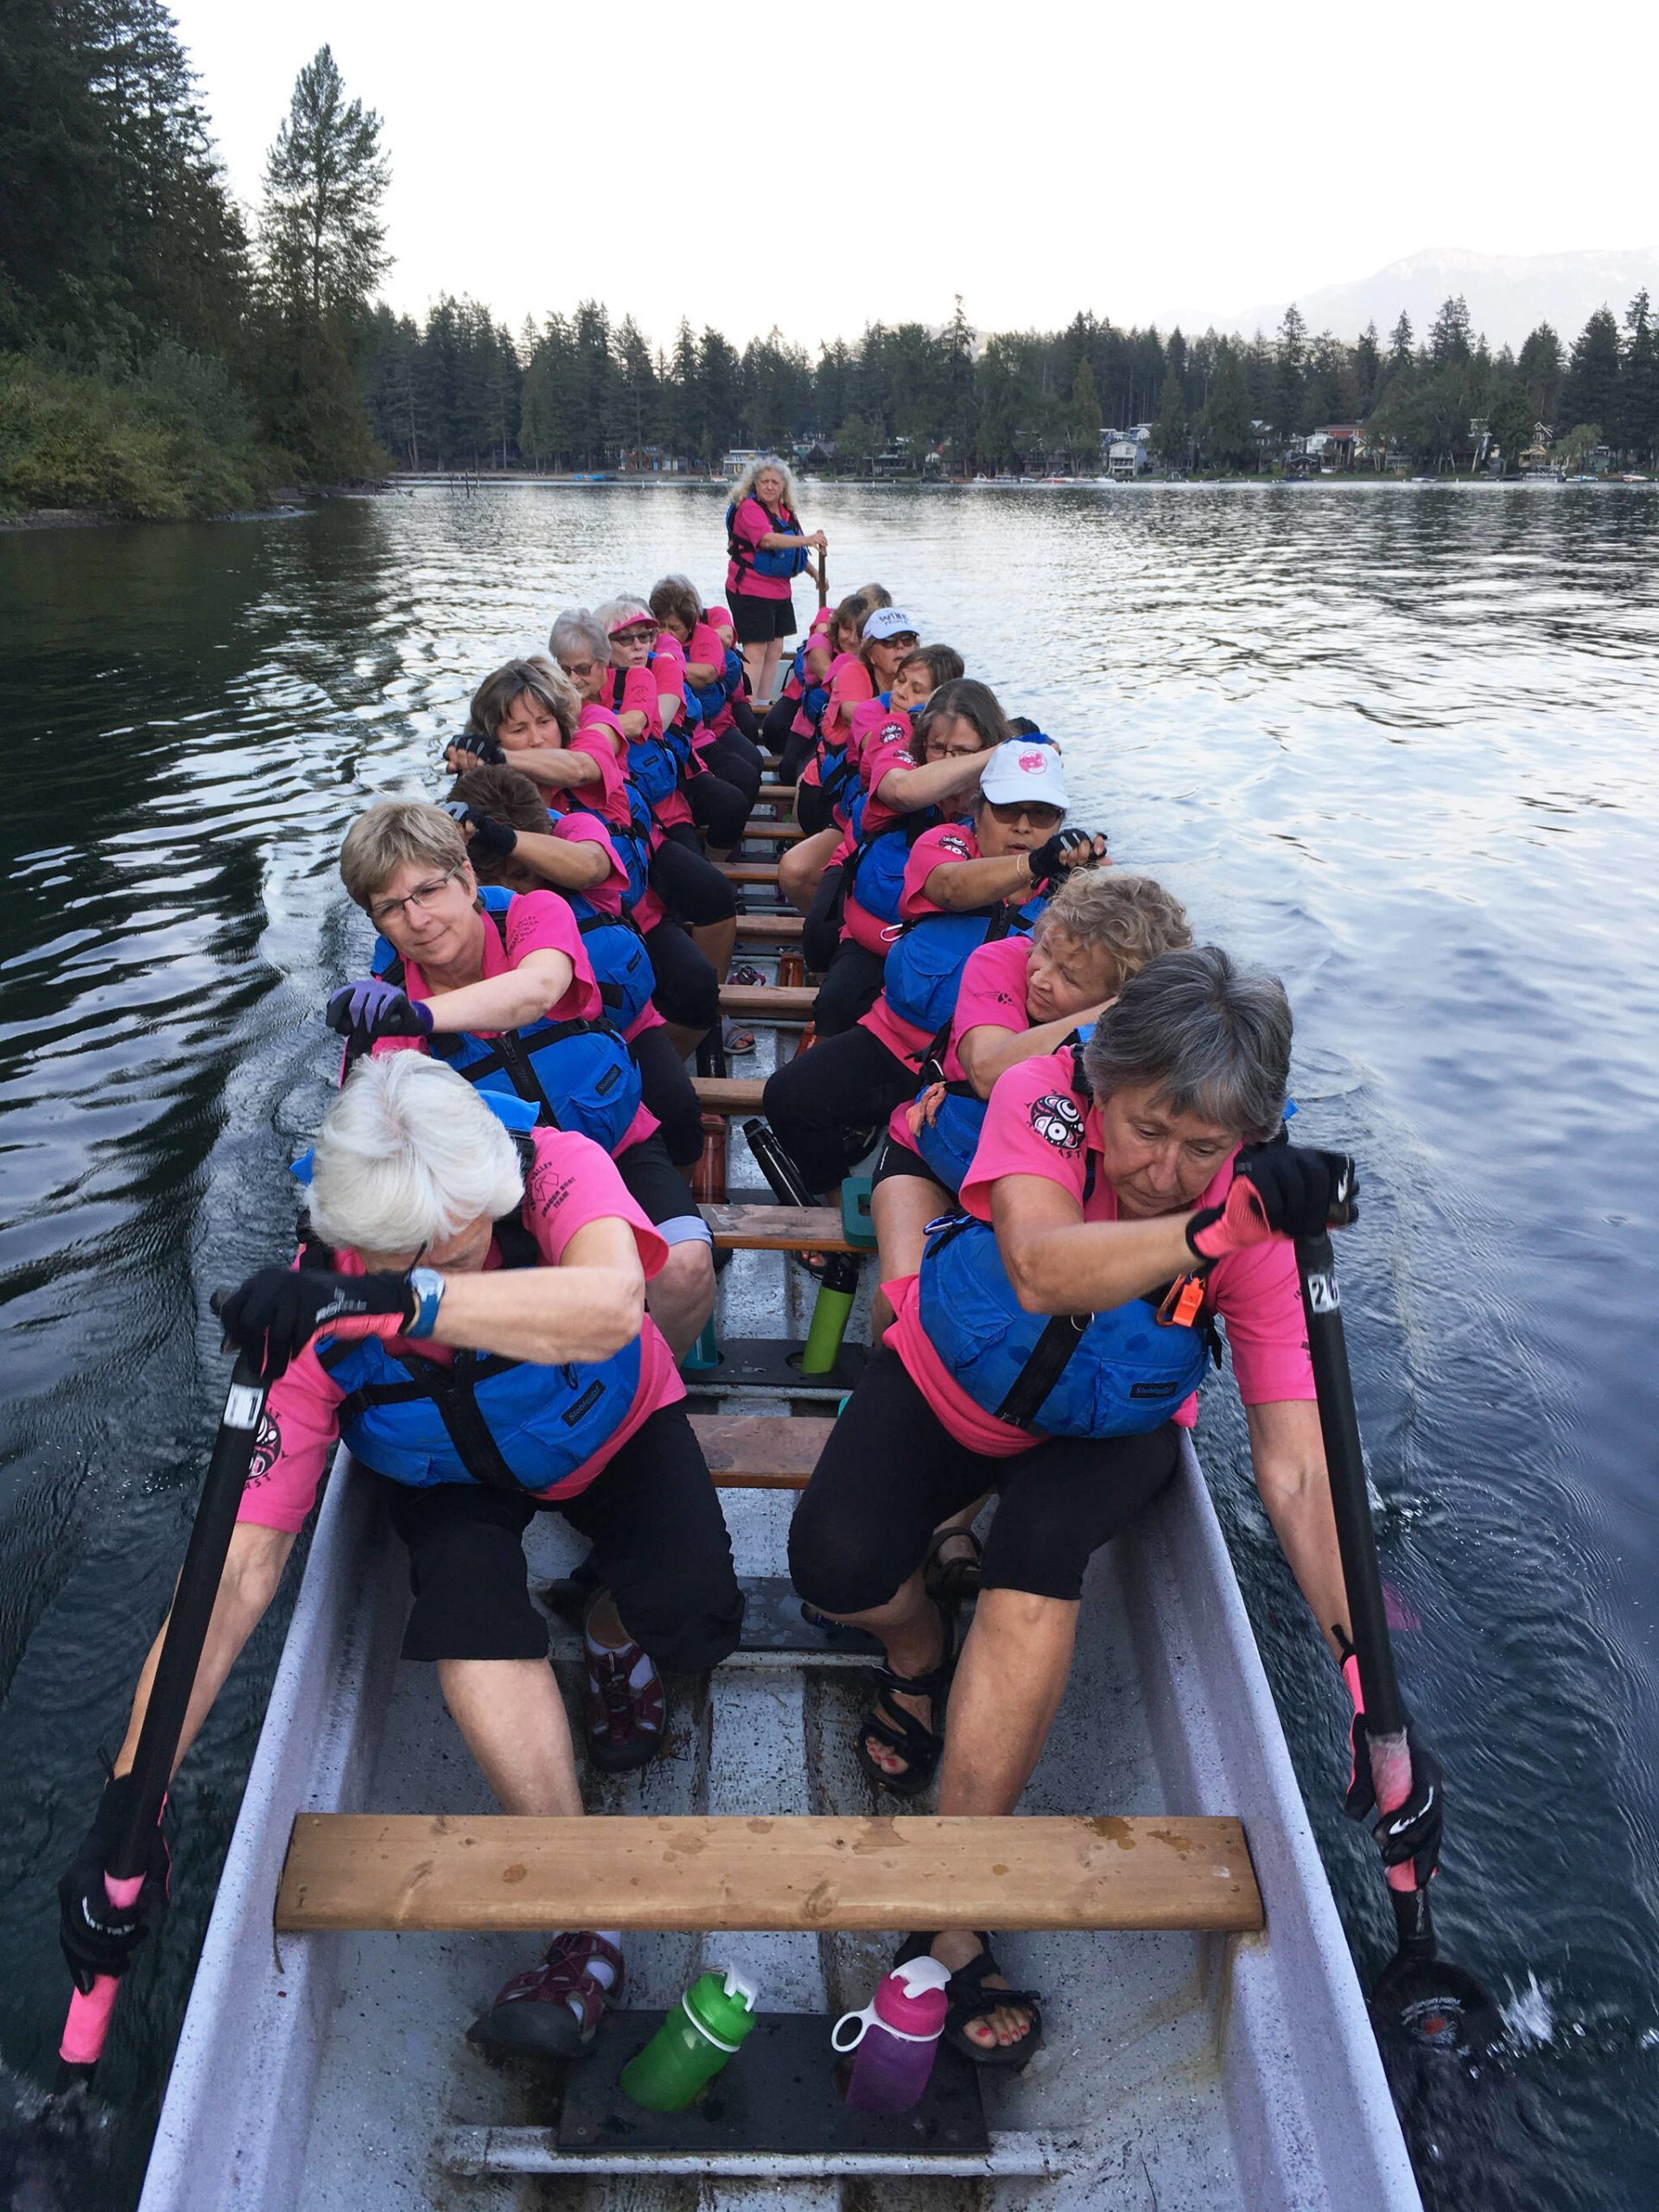 The Spirit Abreast team practises on Cultus Lake in the summer of 2018. (Sherry Hunt photo)